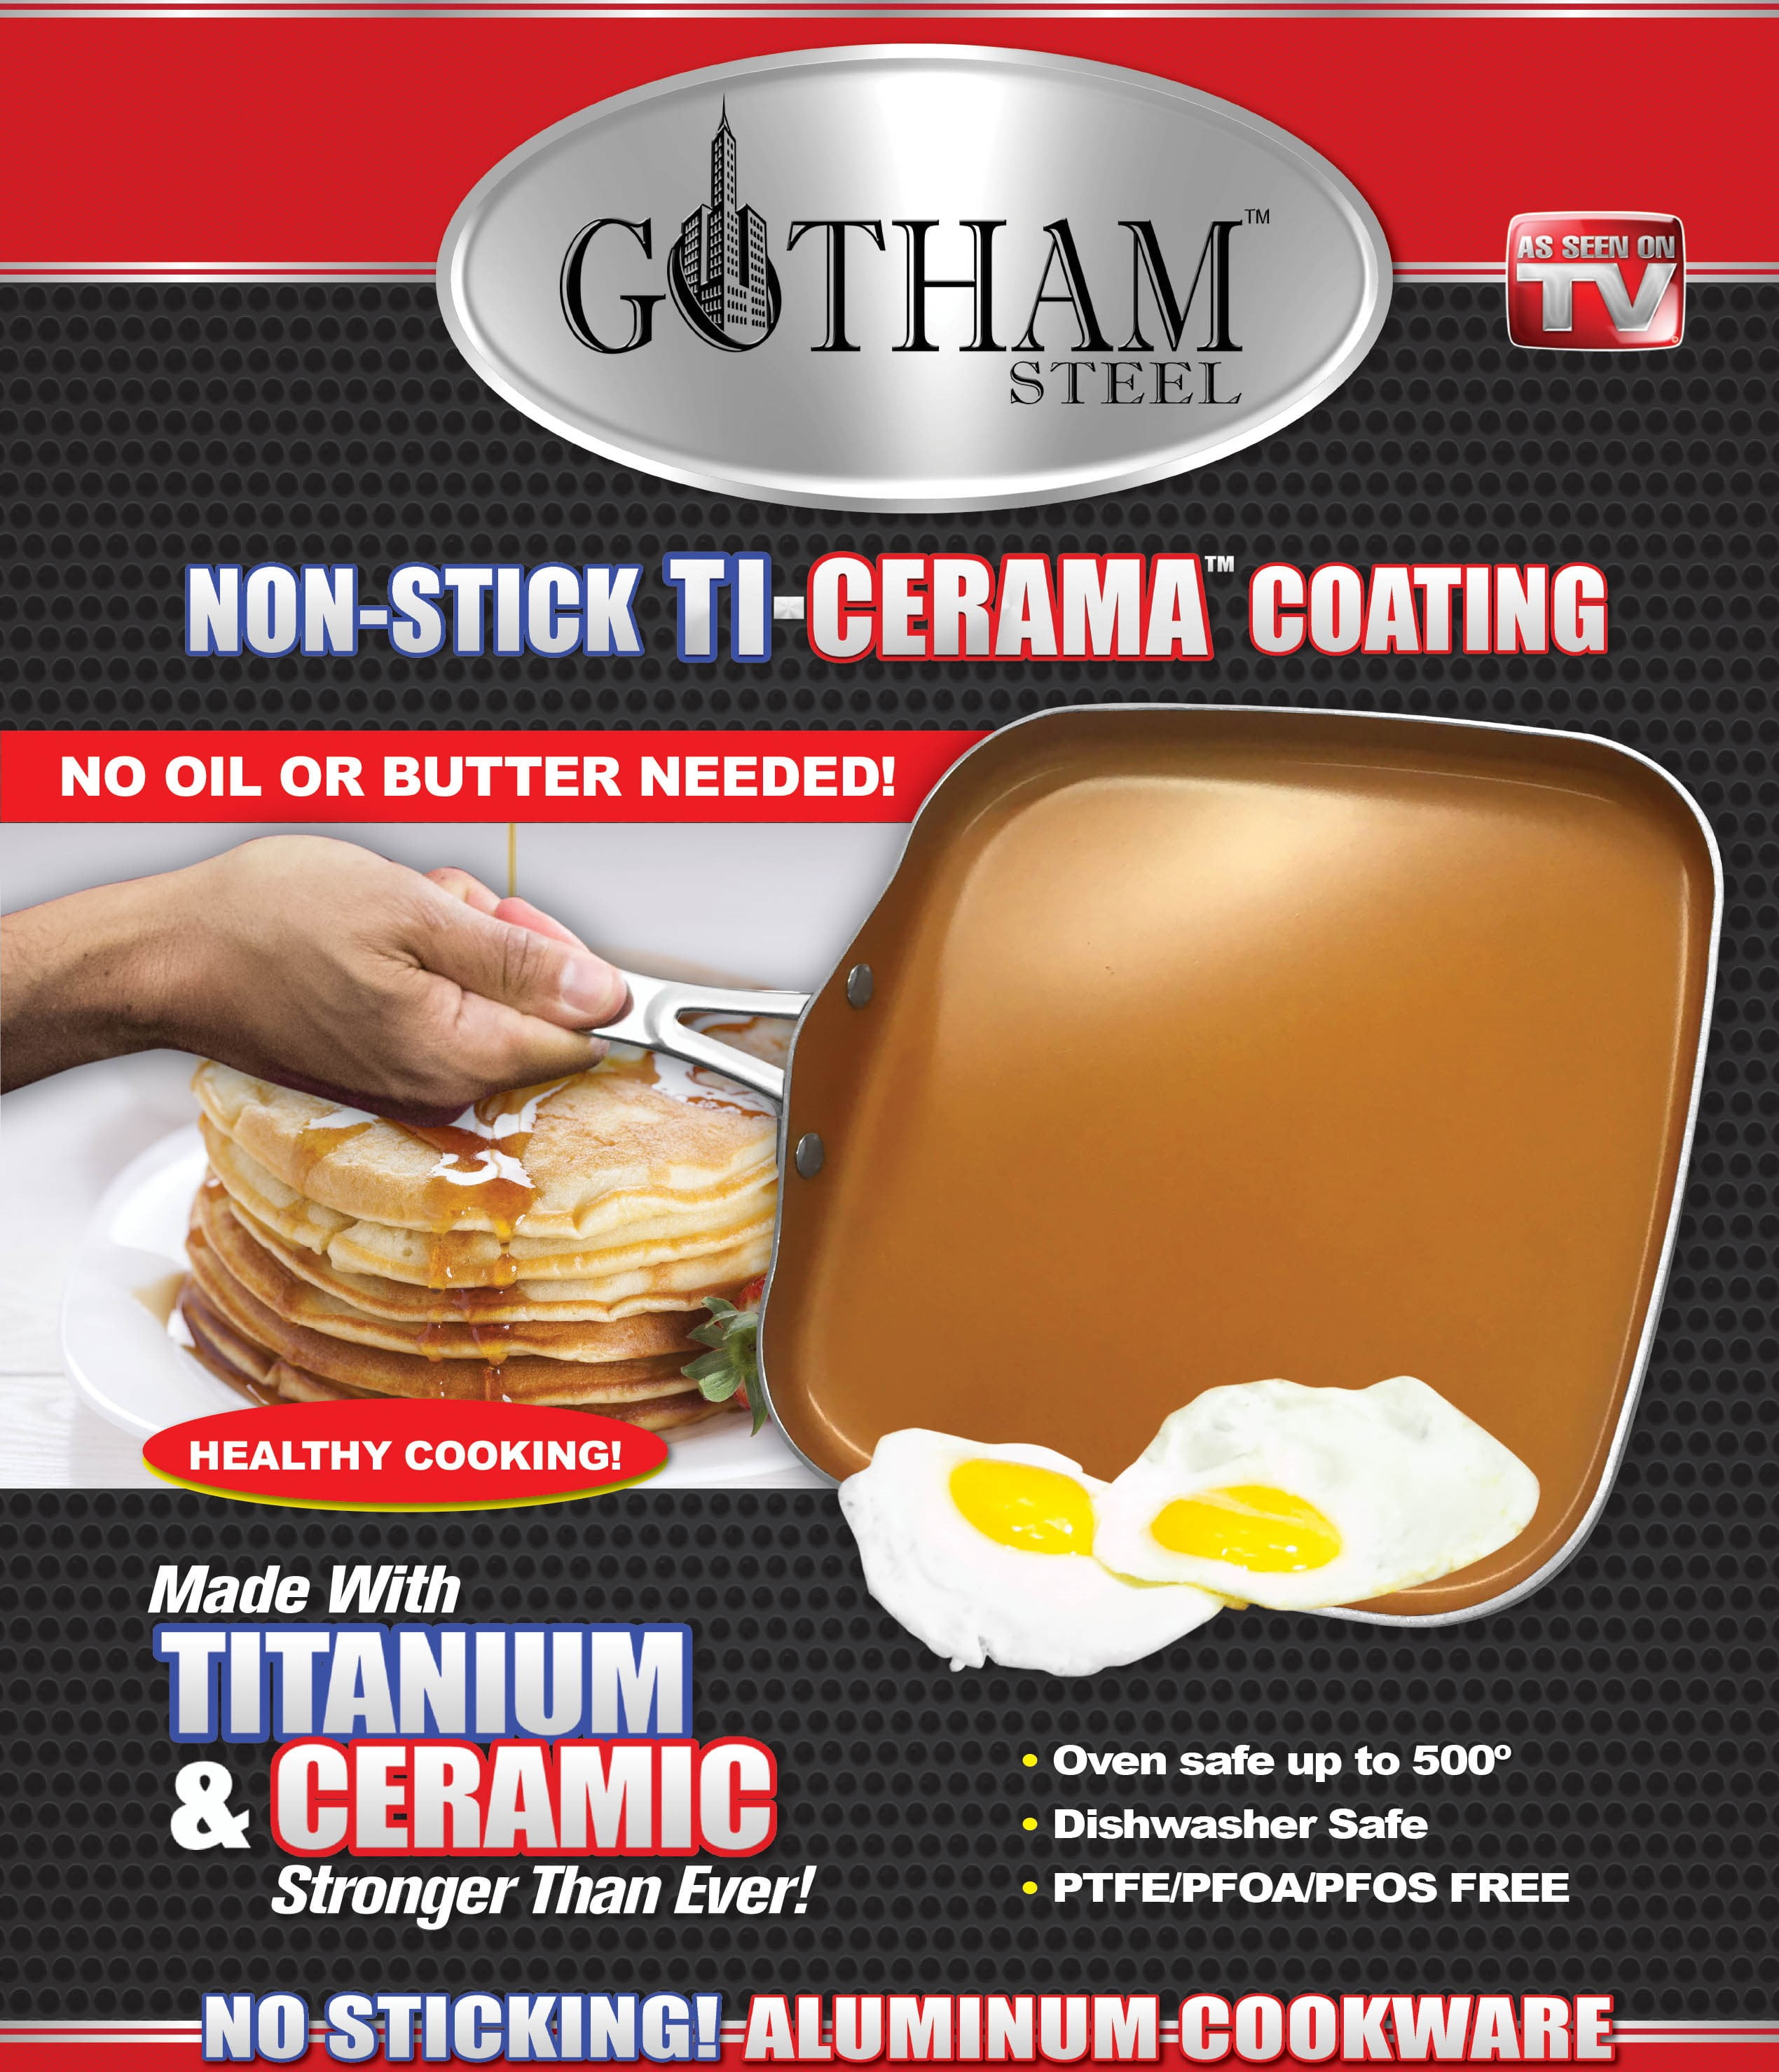 As Seen On TV - The Gotham Steel PanDid It Really Work